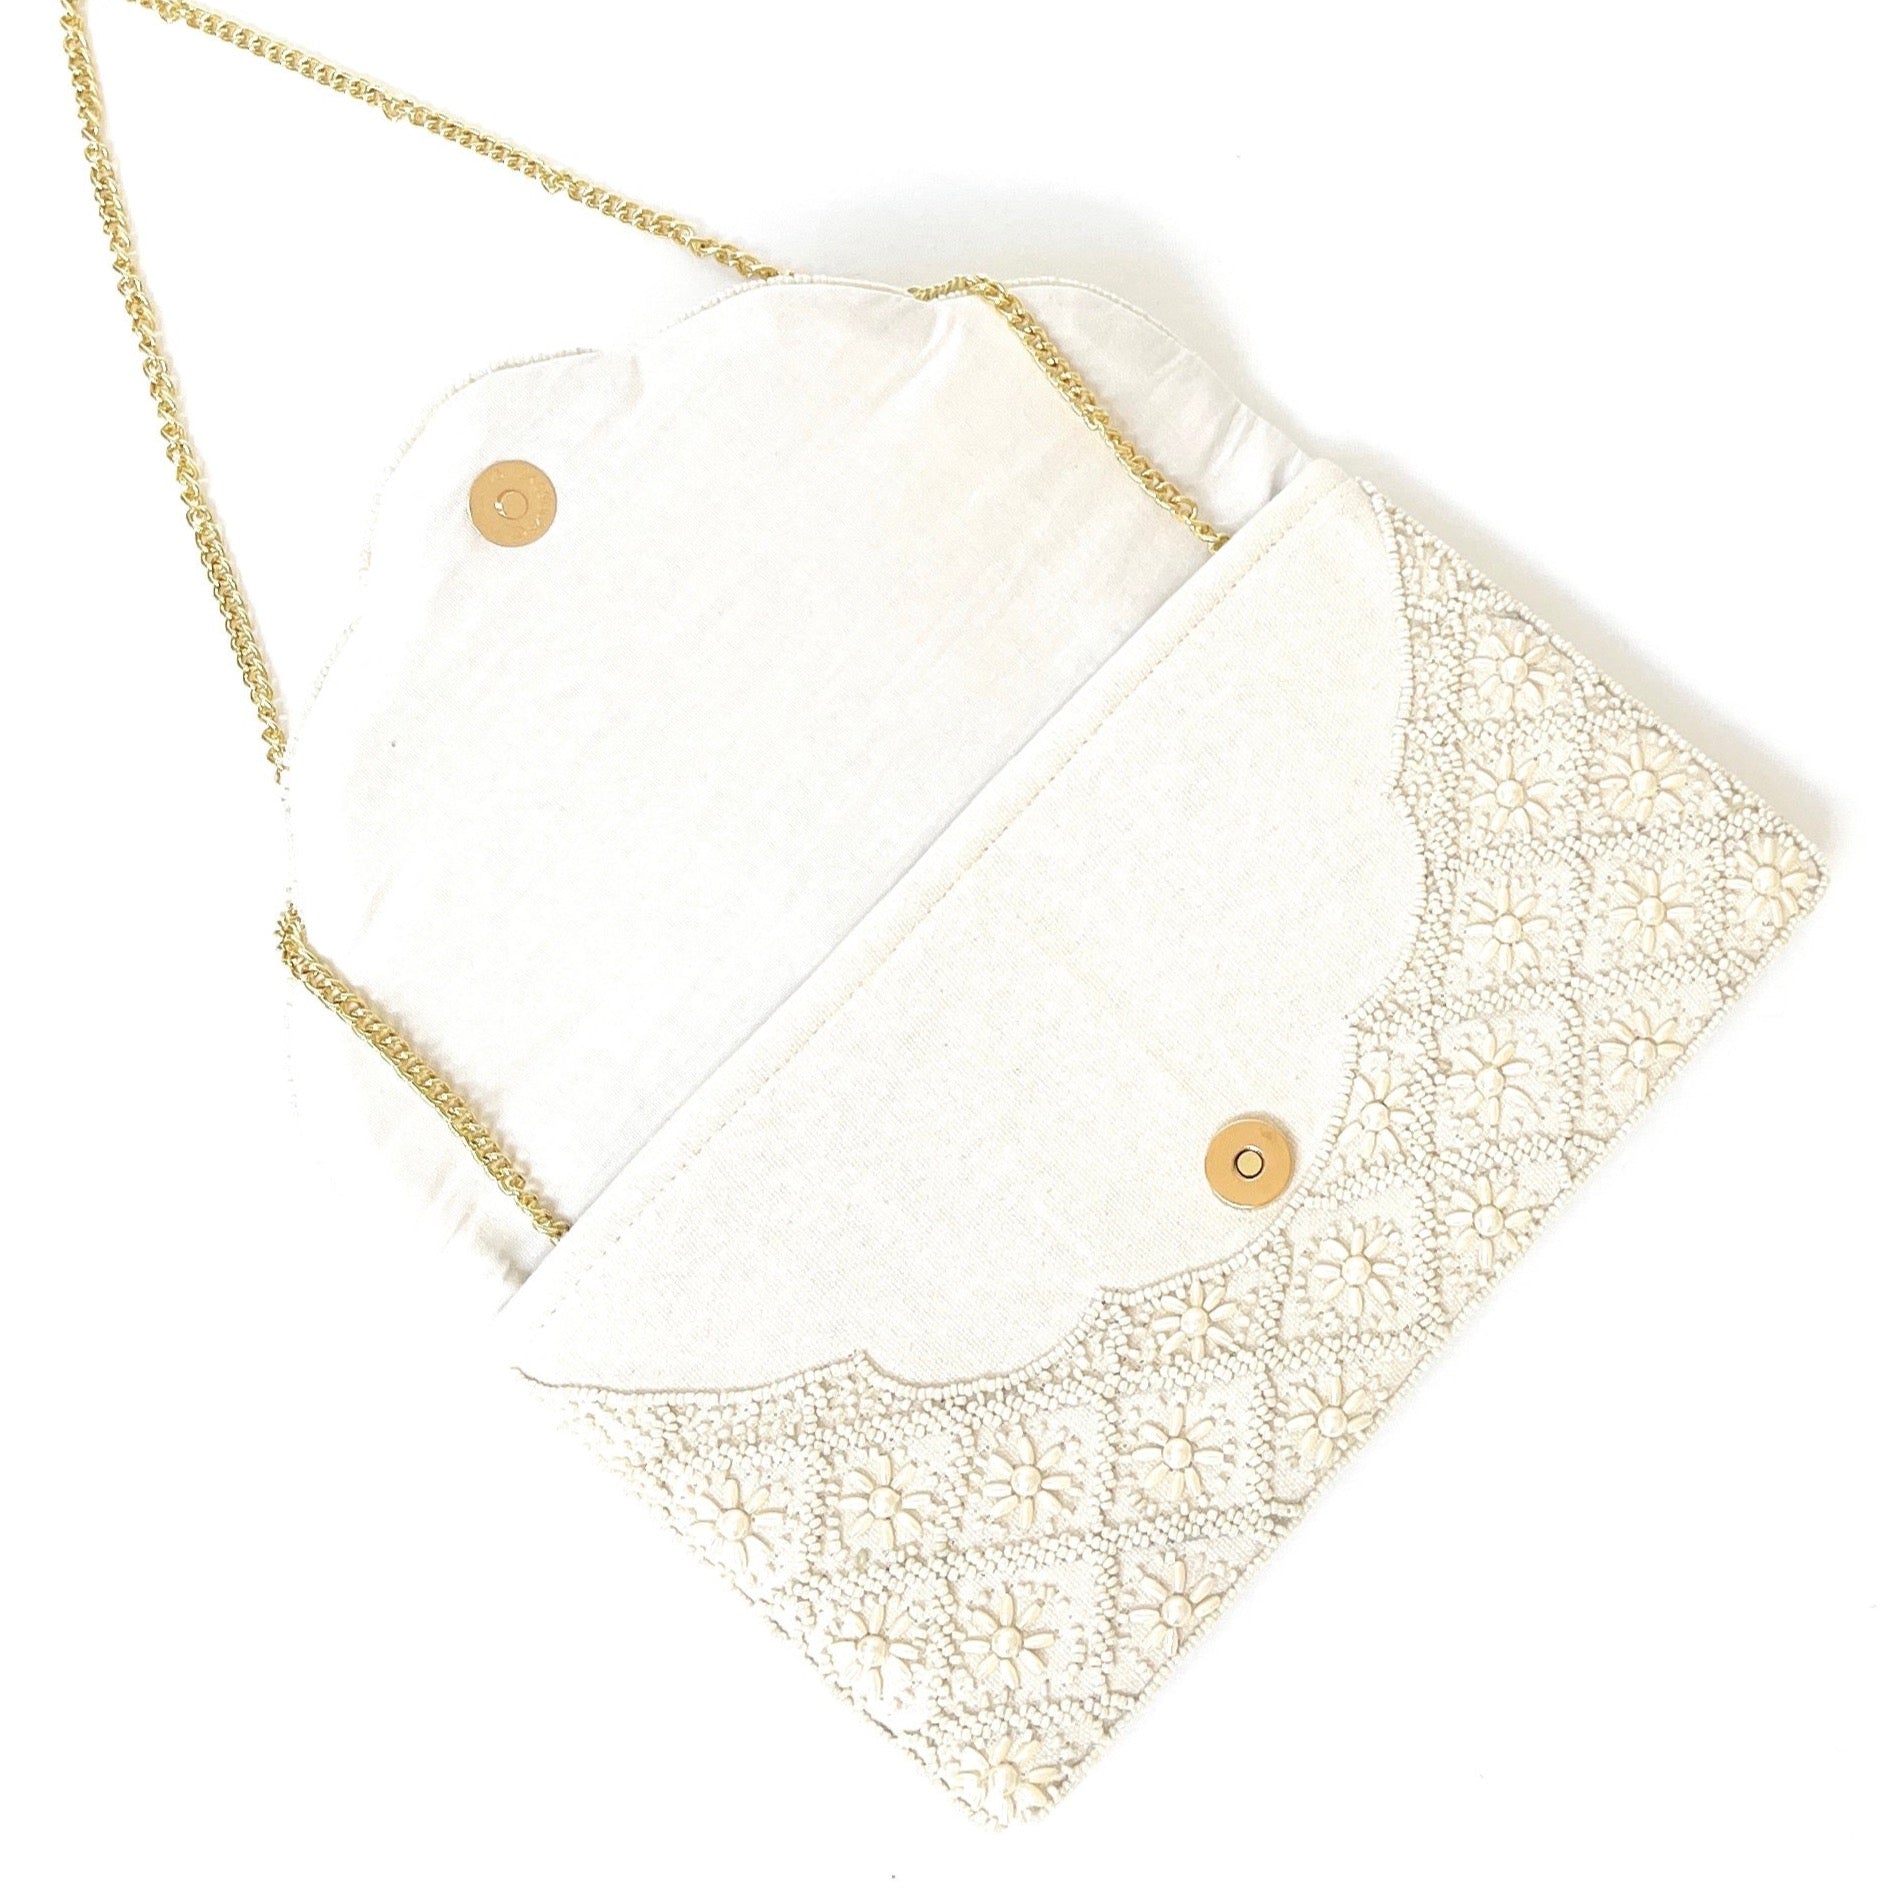 Hotselling! Embroidered Ladies Bridal Clutch White & Golden Online For  Girls - Everlasting Memories